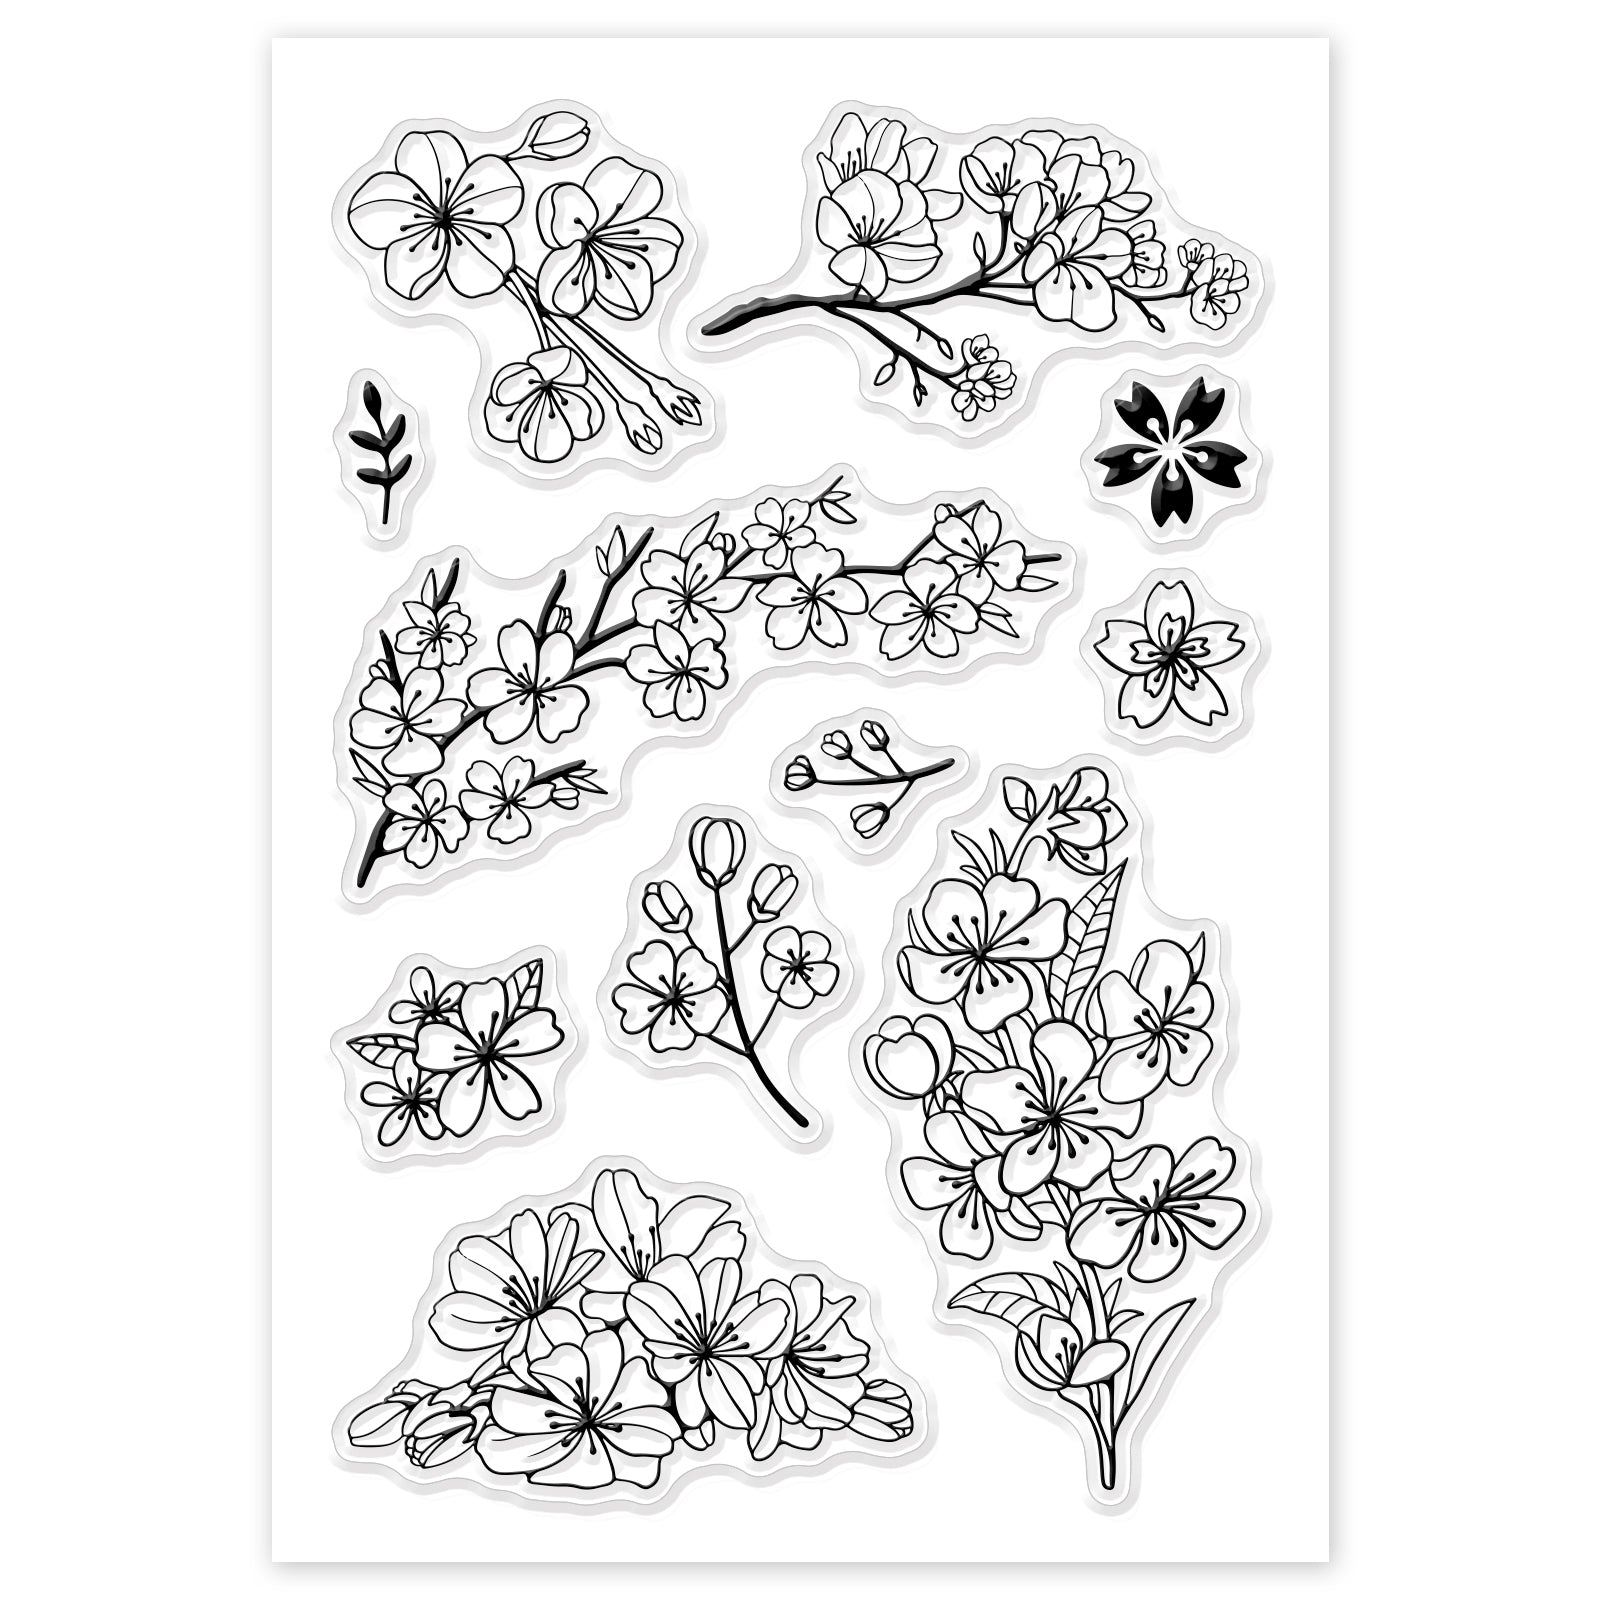 GLOBLELAND Cherry Blossoms Clear Stamps Silicone Stamp Cards Flowers Clear Stamps for Card Making Decoration and DIY Scrapbooking